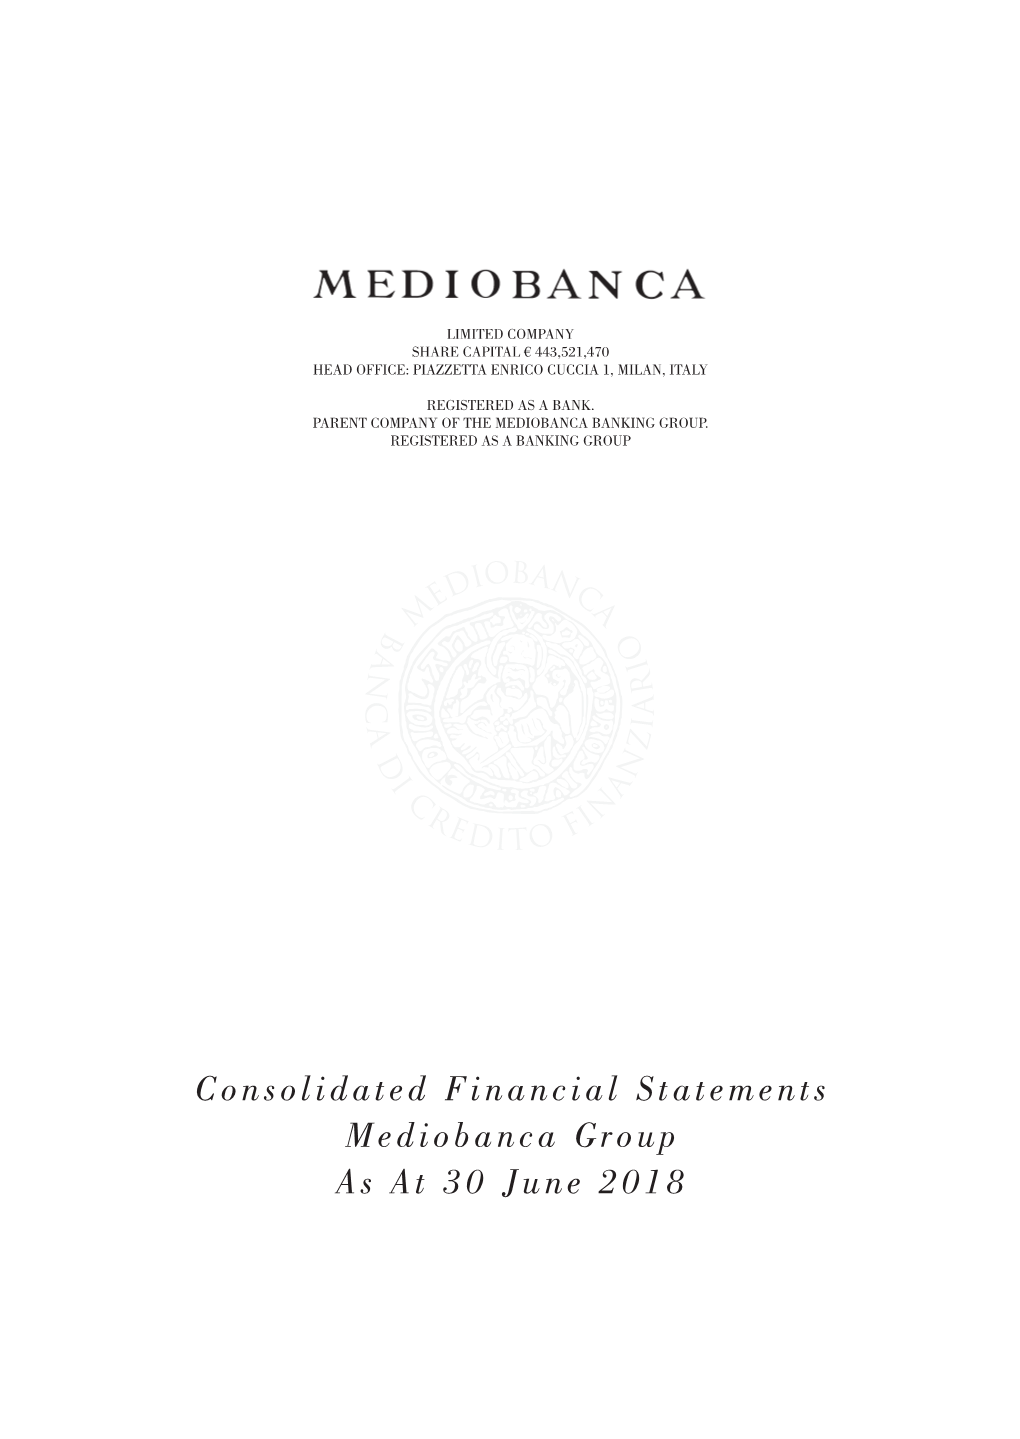 Consolidated Financial Statements Mediobanca Group As at 30 June 2018